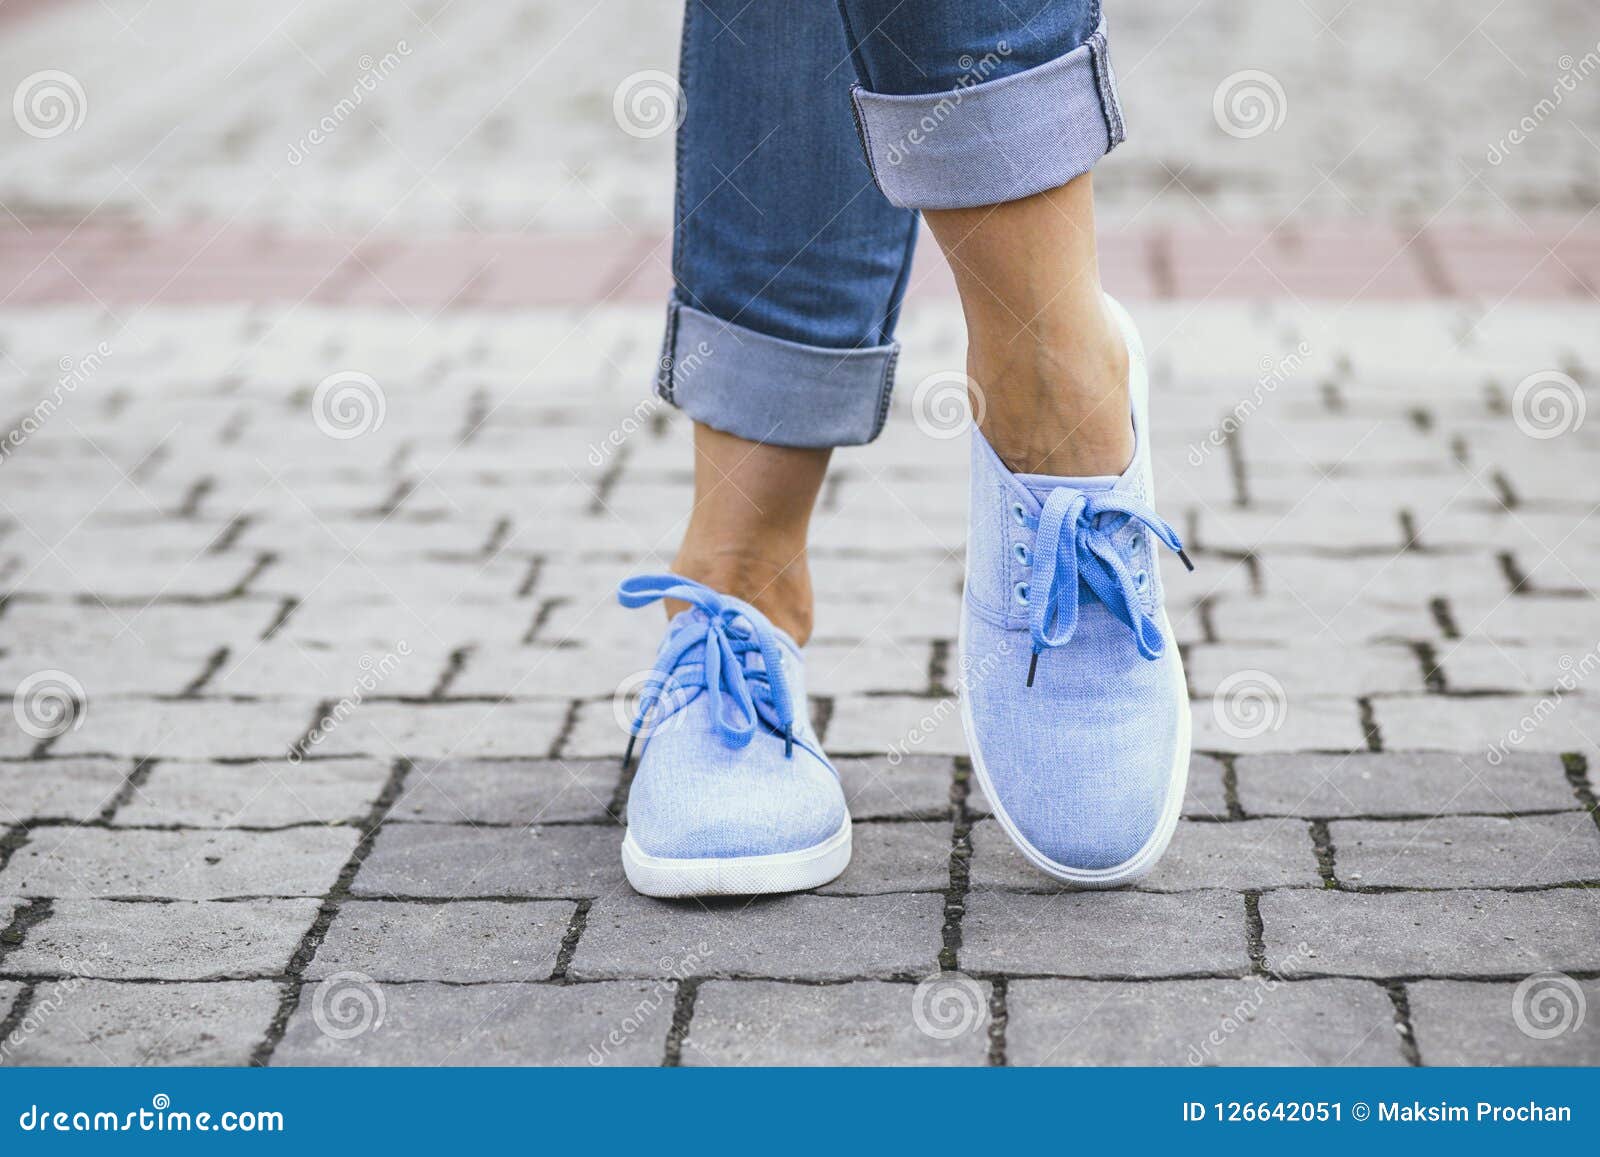 What pants go with a light blue shoes? - Quora